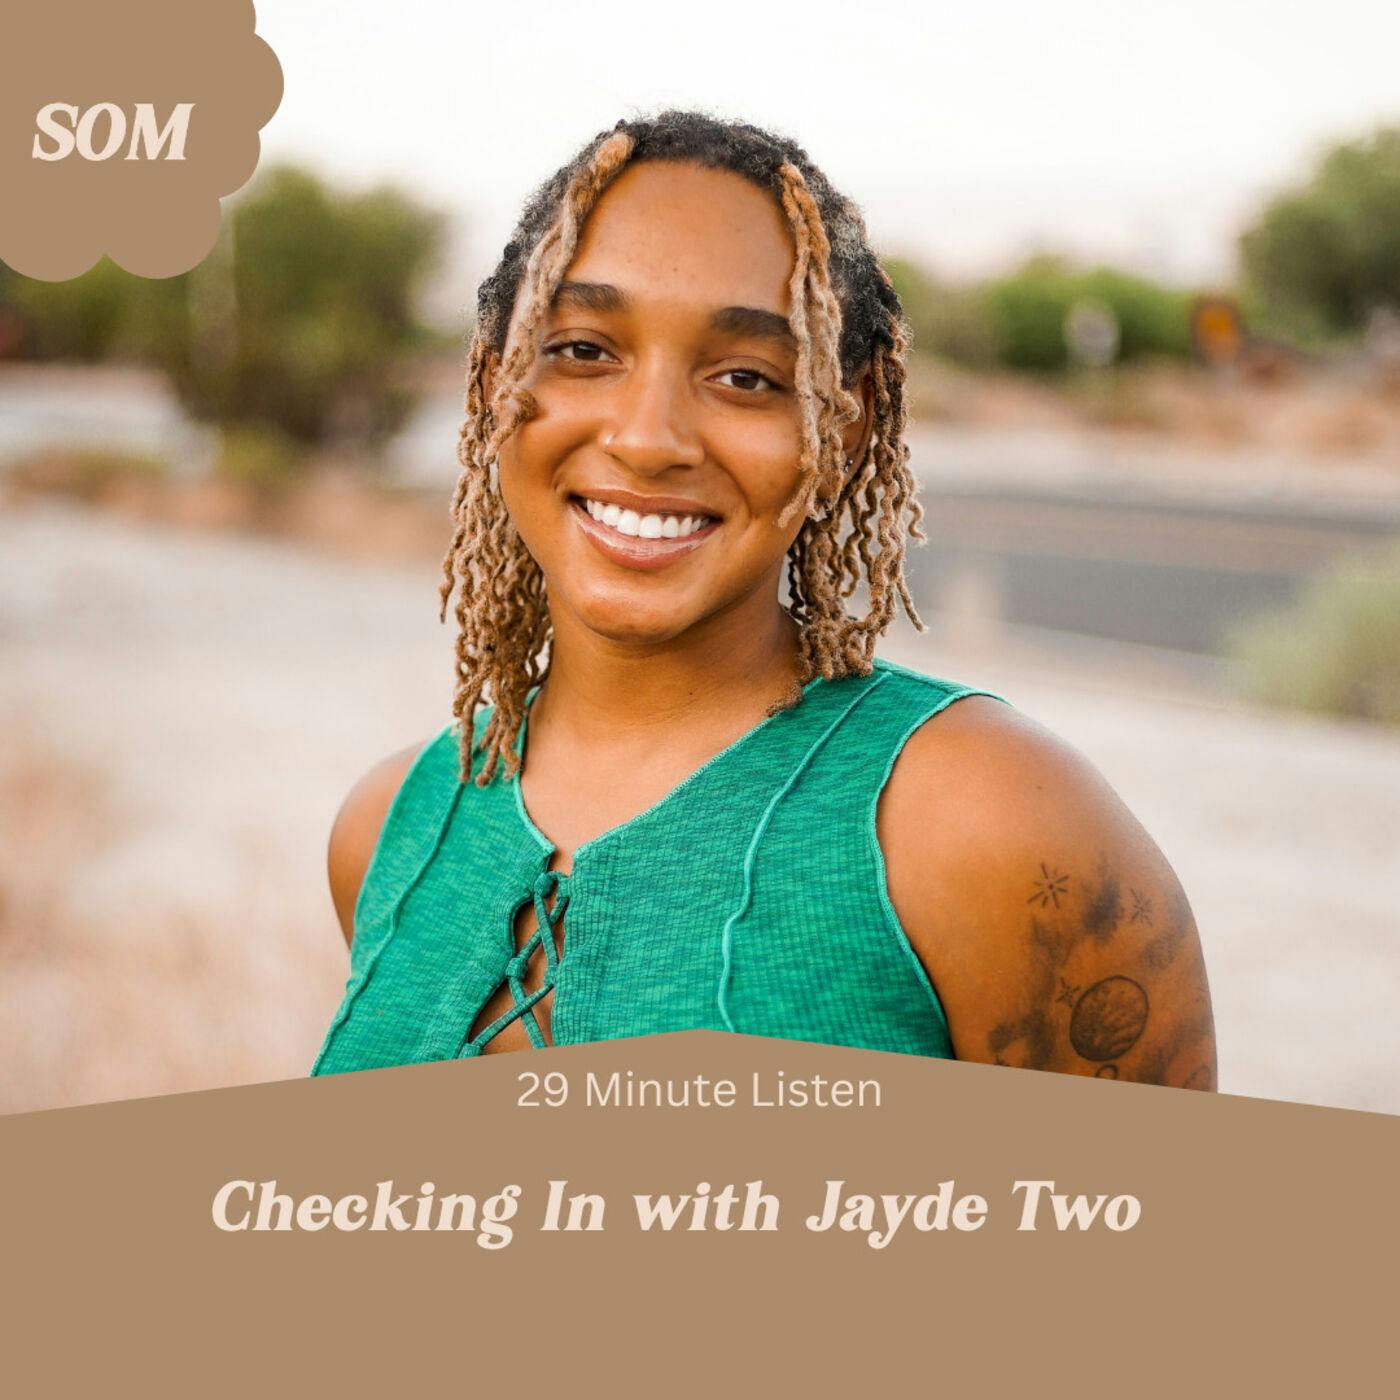 Checking in with Jayde 2